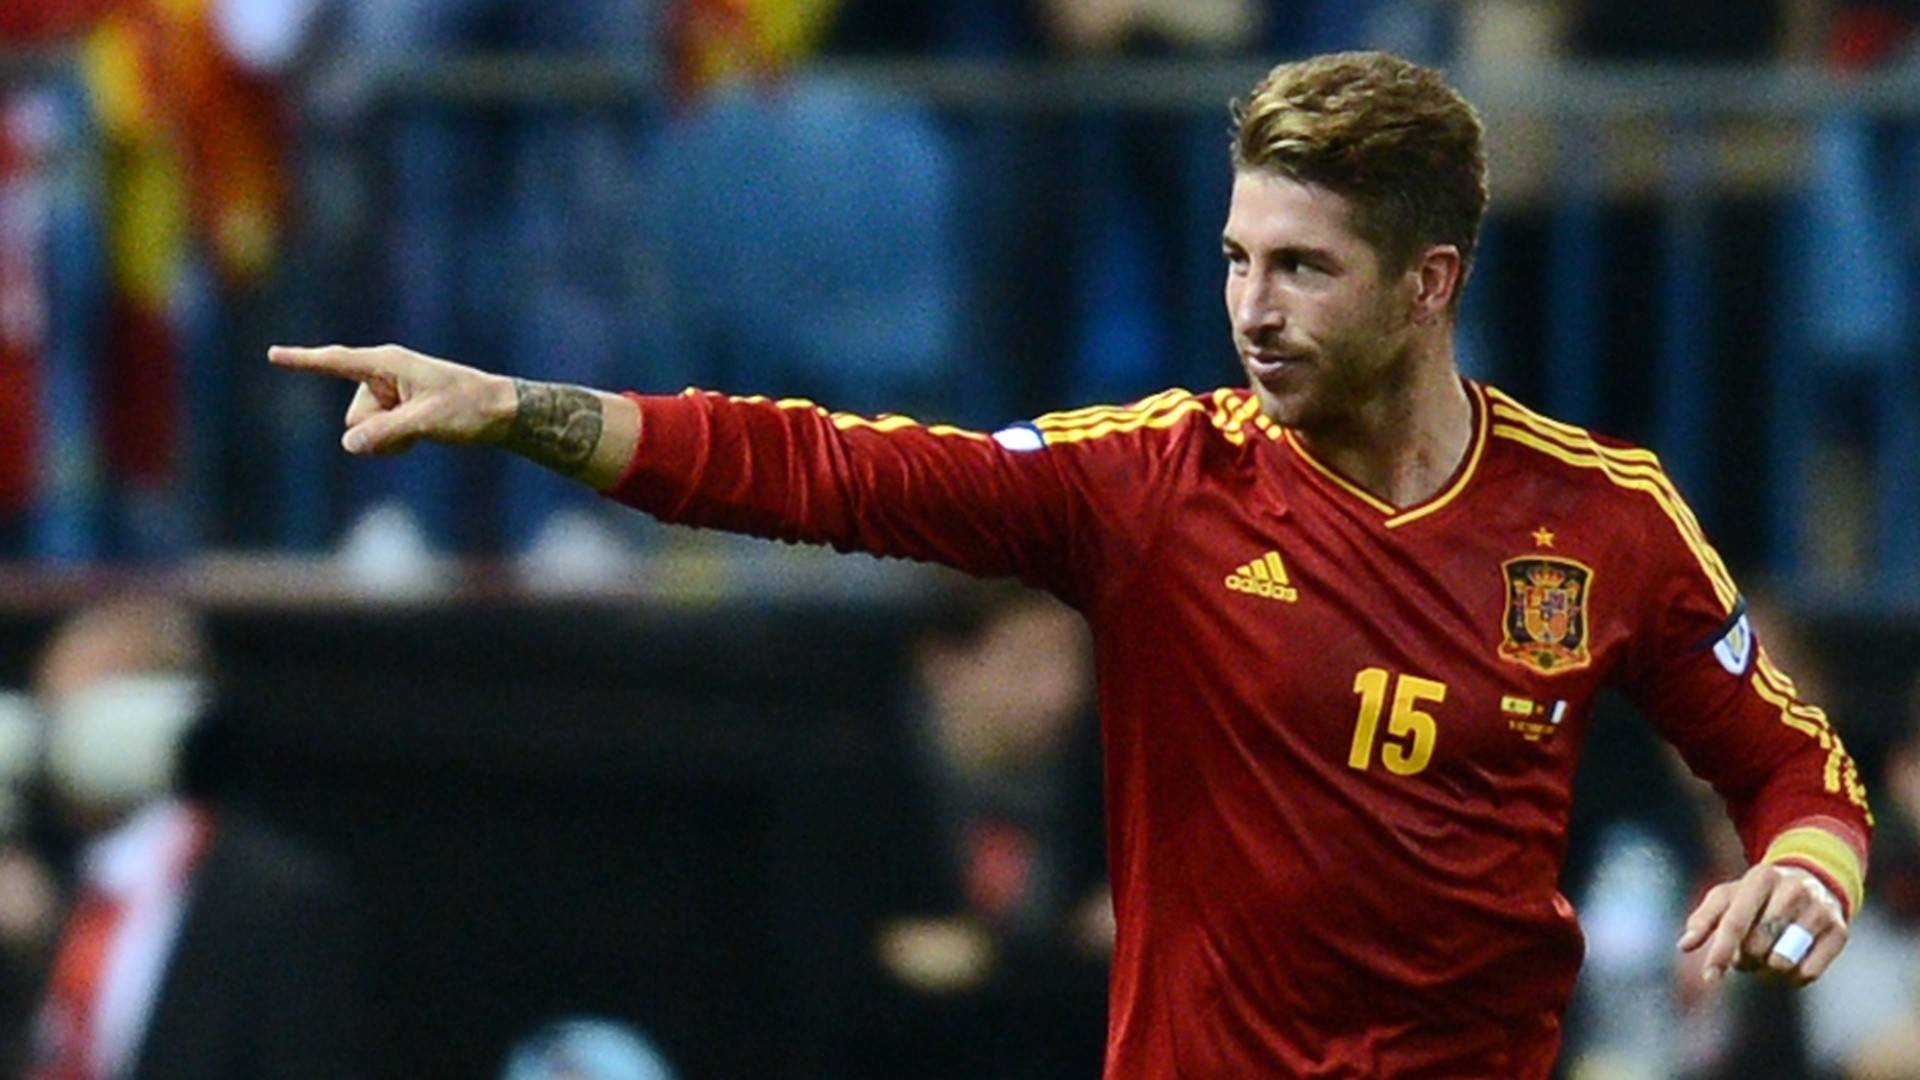 Sergio Ramos acts as lead singer for Spain&;s Euro 2016 song "La